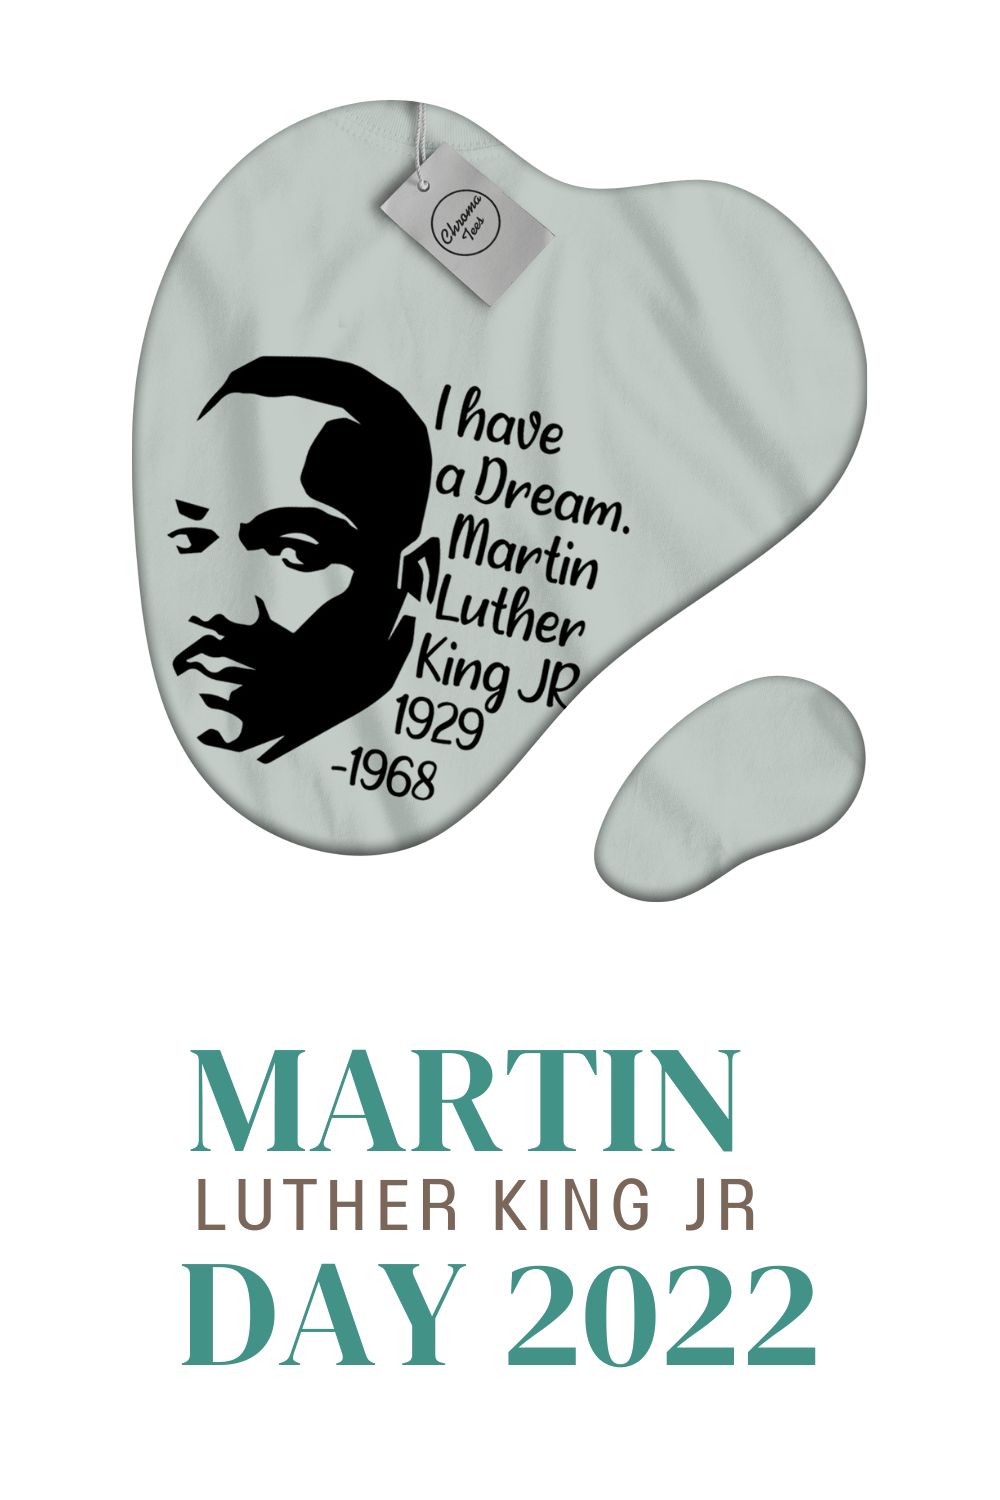 Martin Luther King National Holiday Day T-Shirt Design pinterest image.